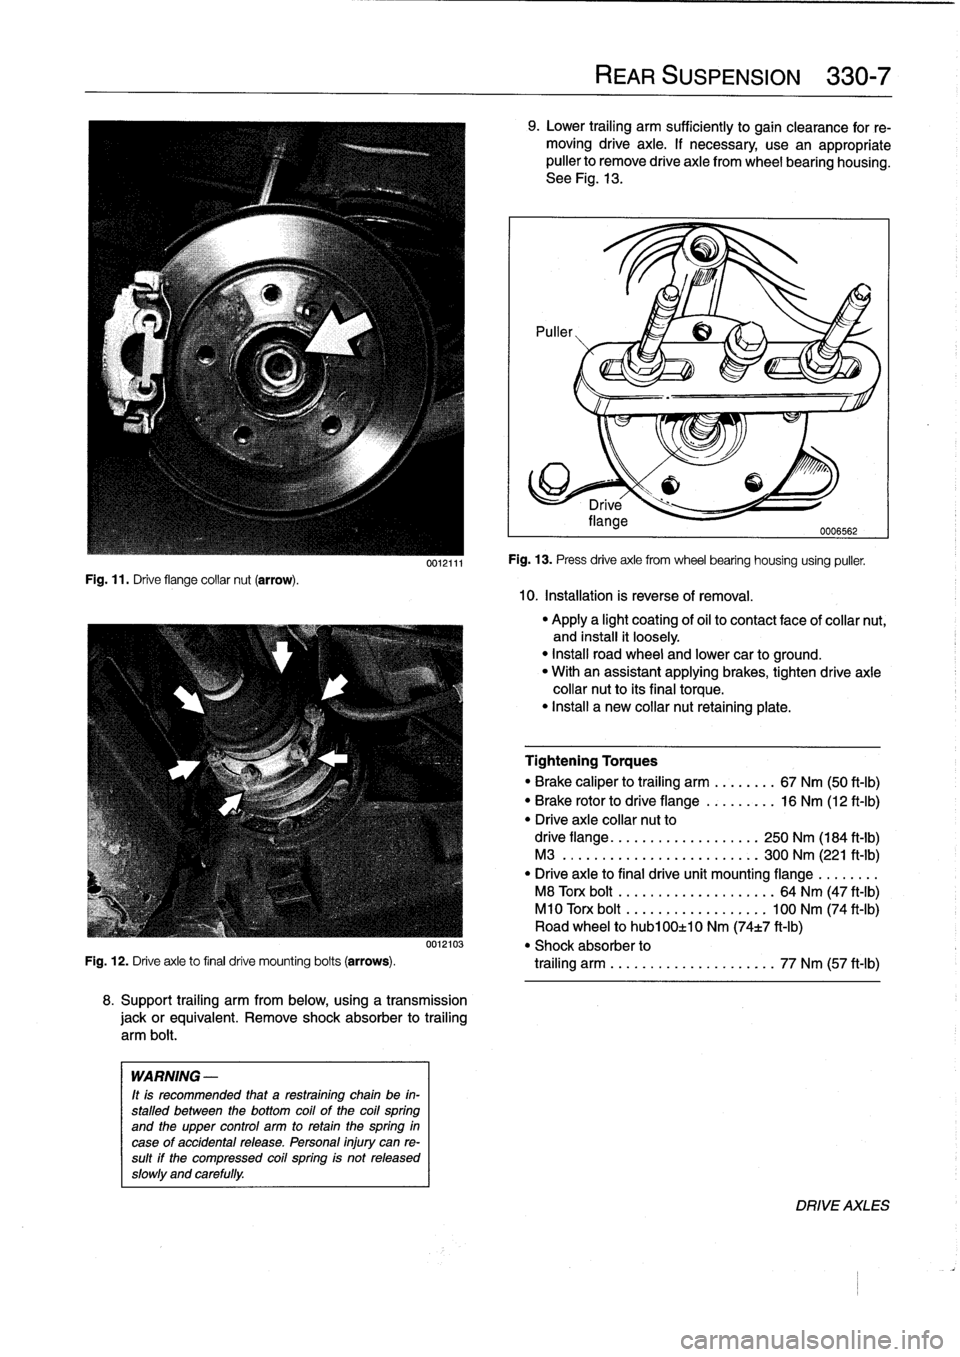 BMW M3 1995 E36 Workshop Manual 
Fig
.
11
.
Drive
flange
collar
nut
(arrow)
.

0012111

8
.
Support
trailing
arm
from
below,
using
a
transmission

jackorequivalent
.
Remove
shock
absorber
to
trailing

arm
bolt
.

WARNING
-

It
is
re